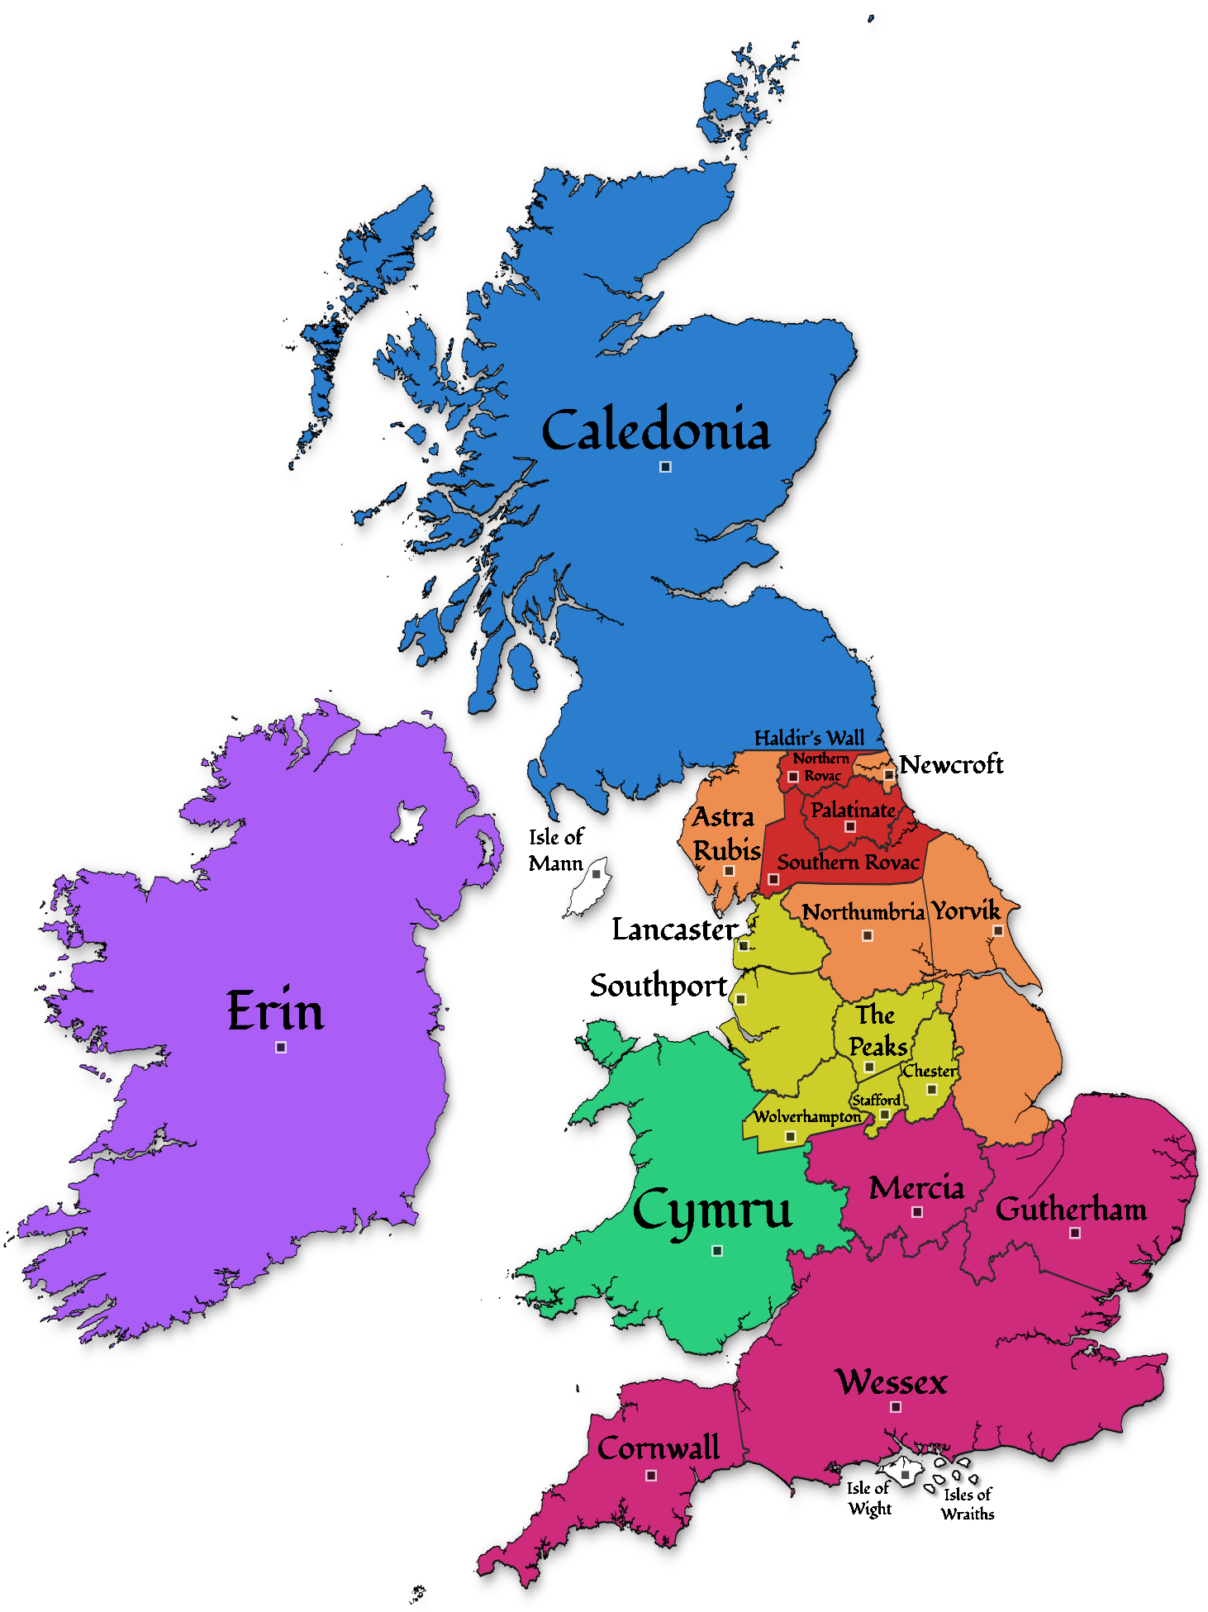 A map of 'Albion' and its surrounding countries. Depicts the UK and Ireland with their TT equivalent names. New are the 'Isles of Wraiths', east of the Isle of Wight.